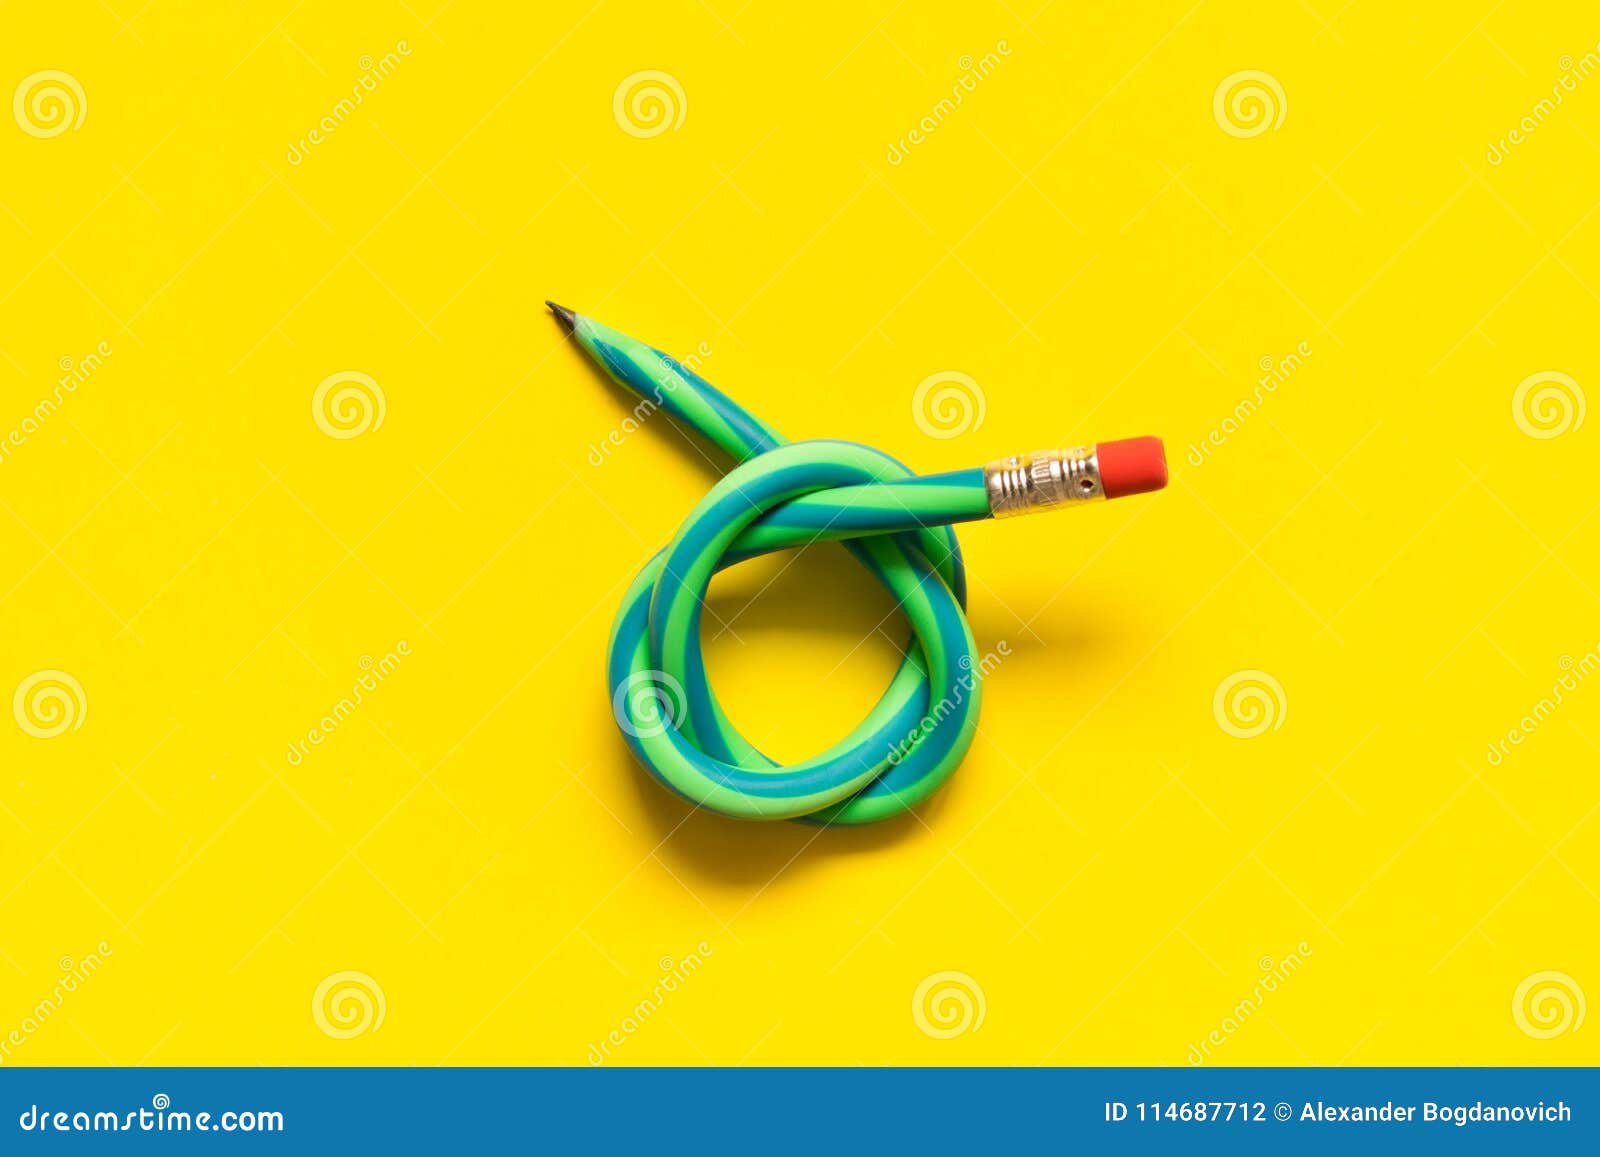 Flexible Pencil . on Yellow Background Stock Photo - Image of matted ...